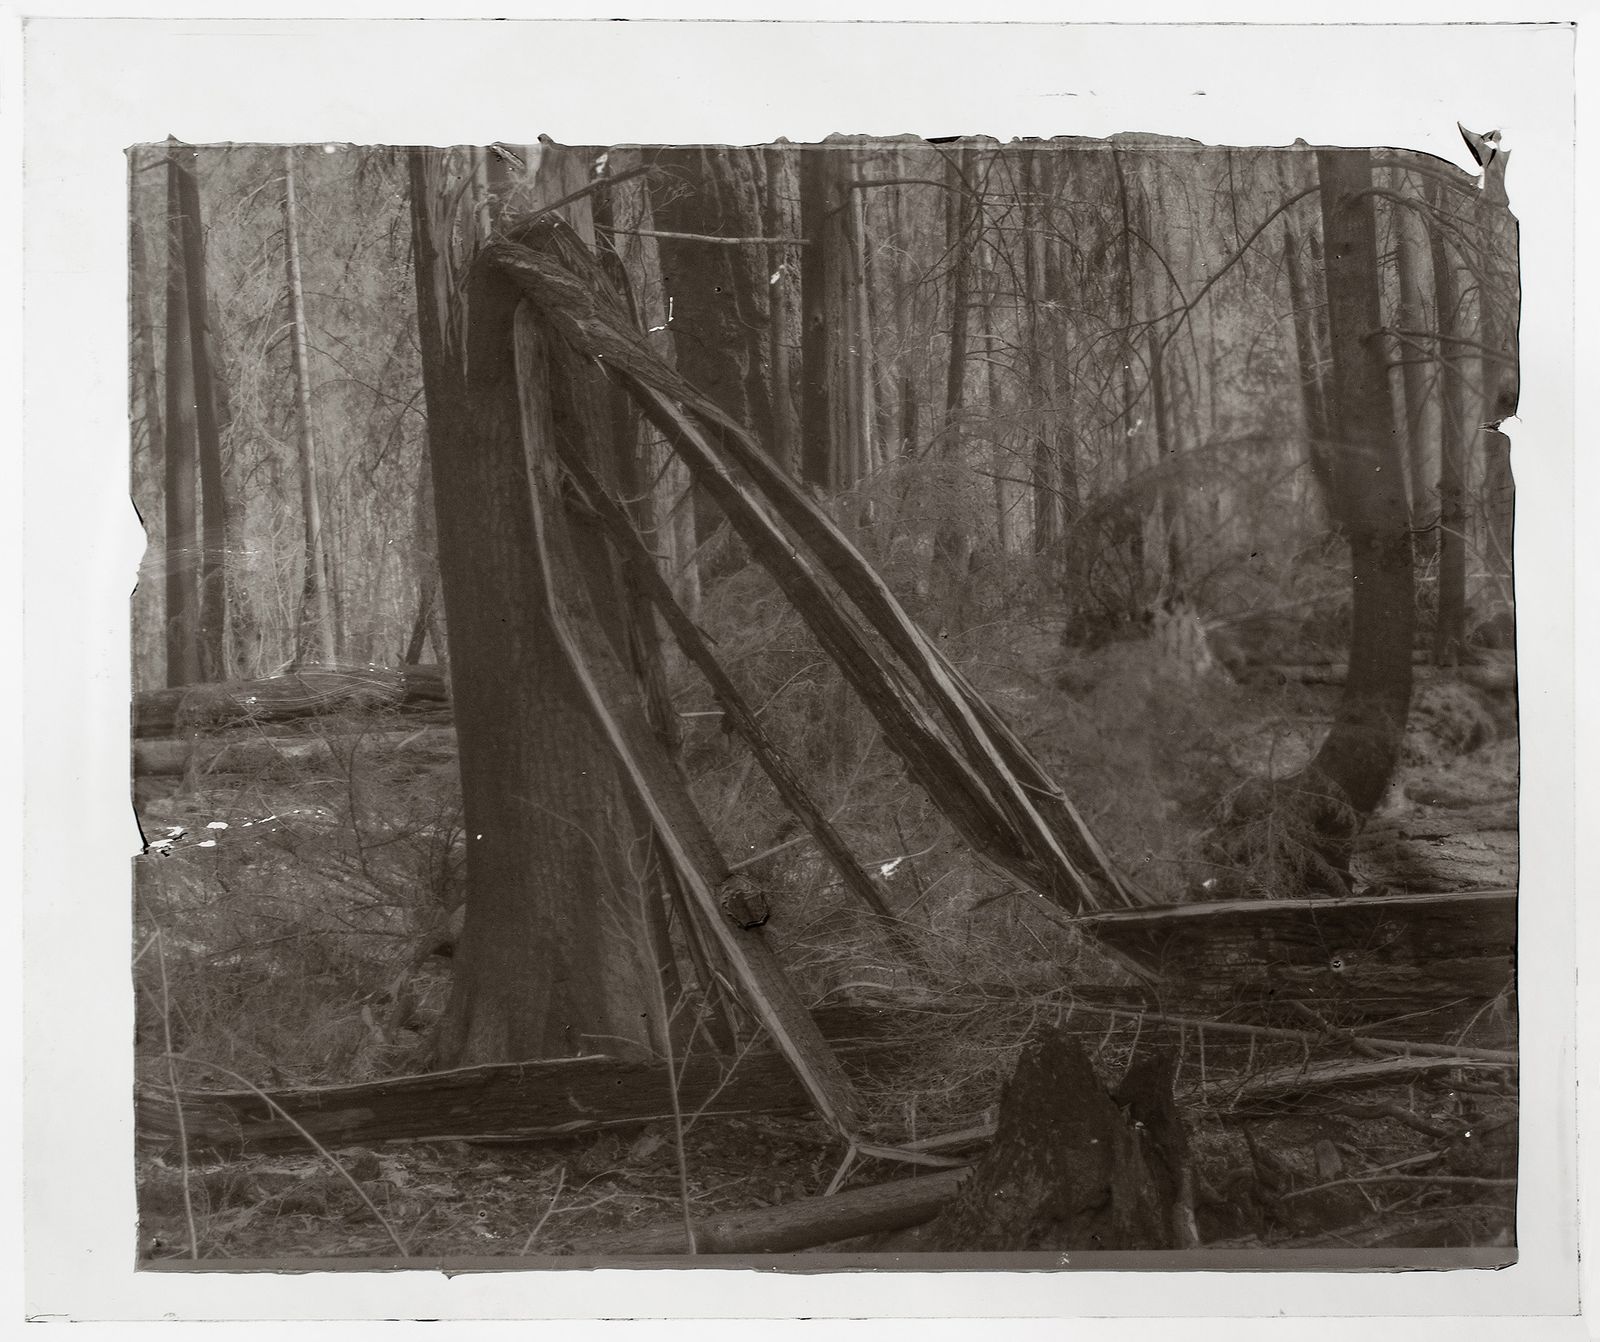 © Sarah Grew - Image from the The Ghost Forest – Out of the Ashes photography project